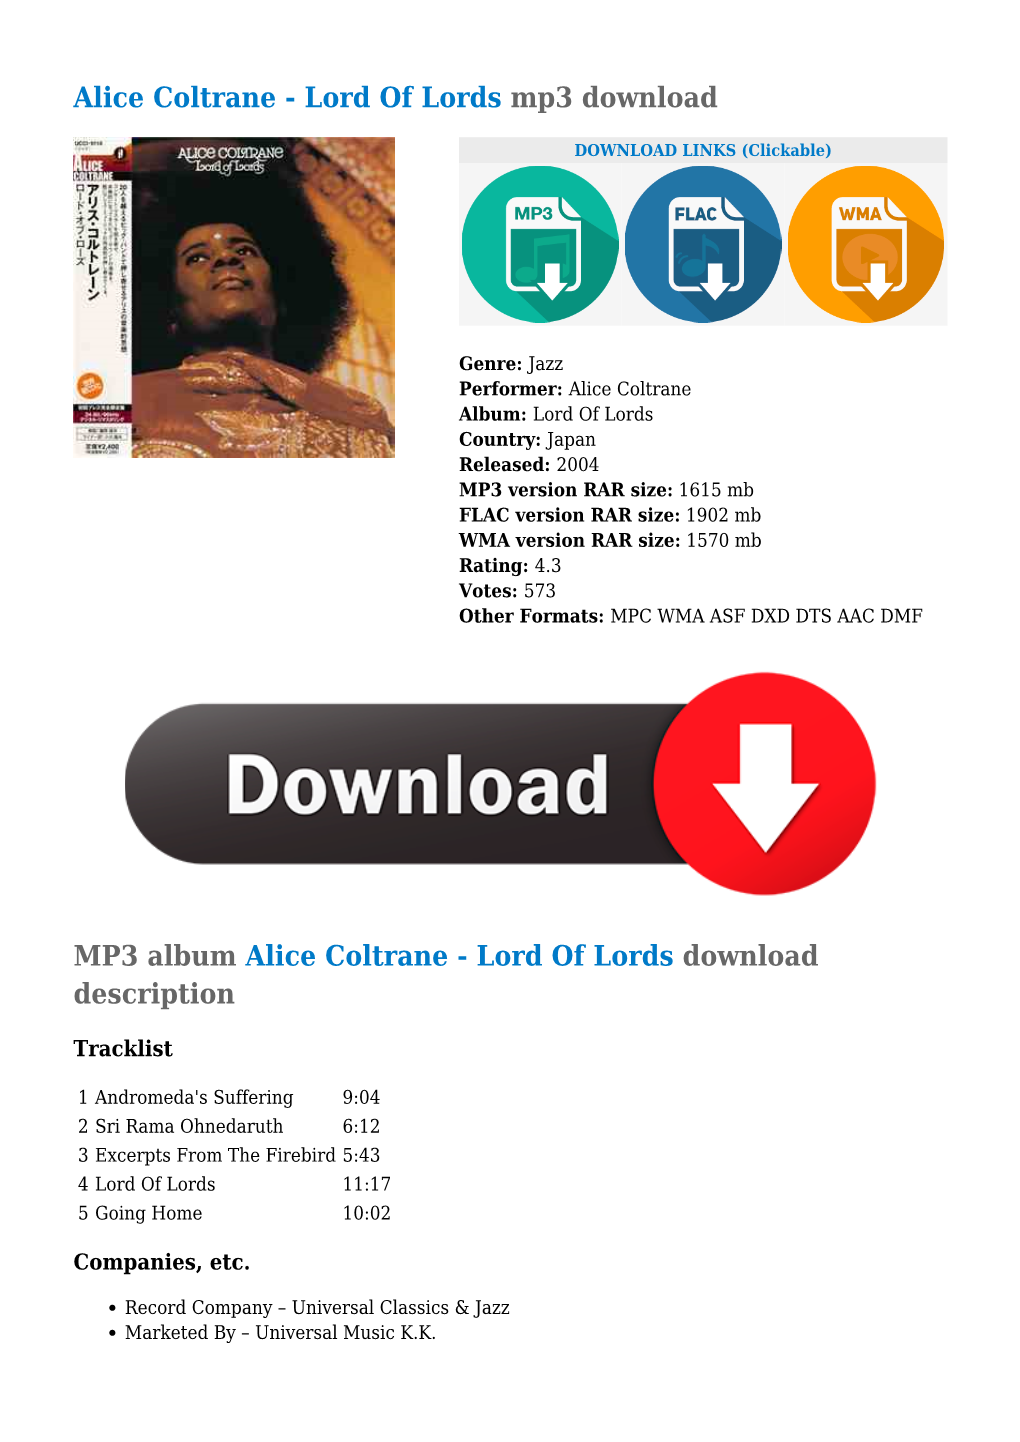 Alice Coltrane - Lord of Lords Mp3 Download